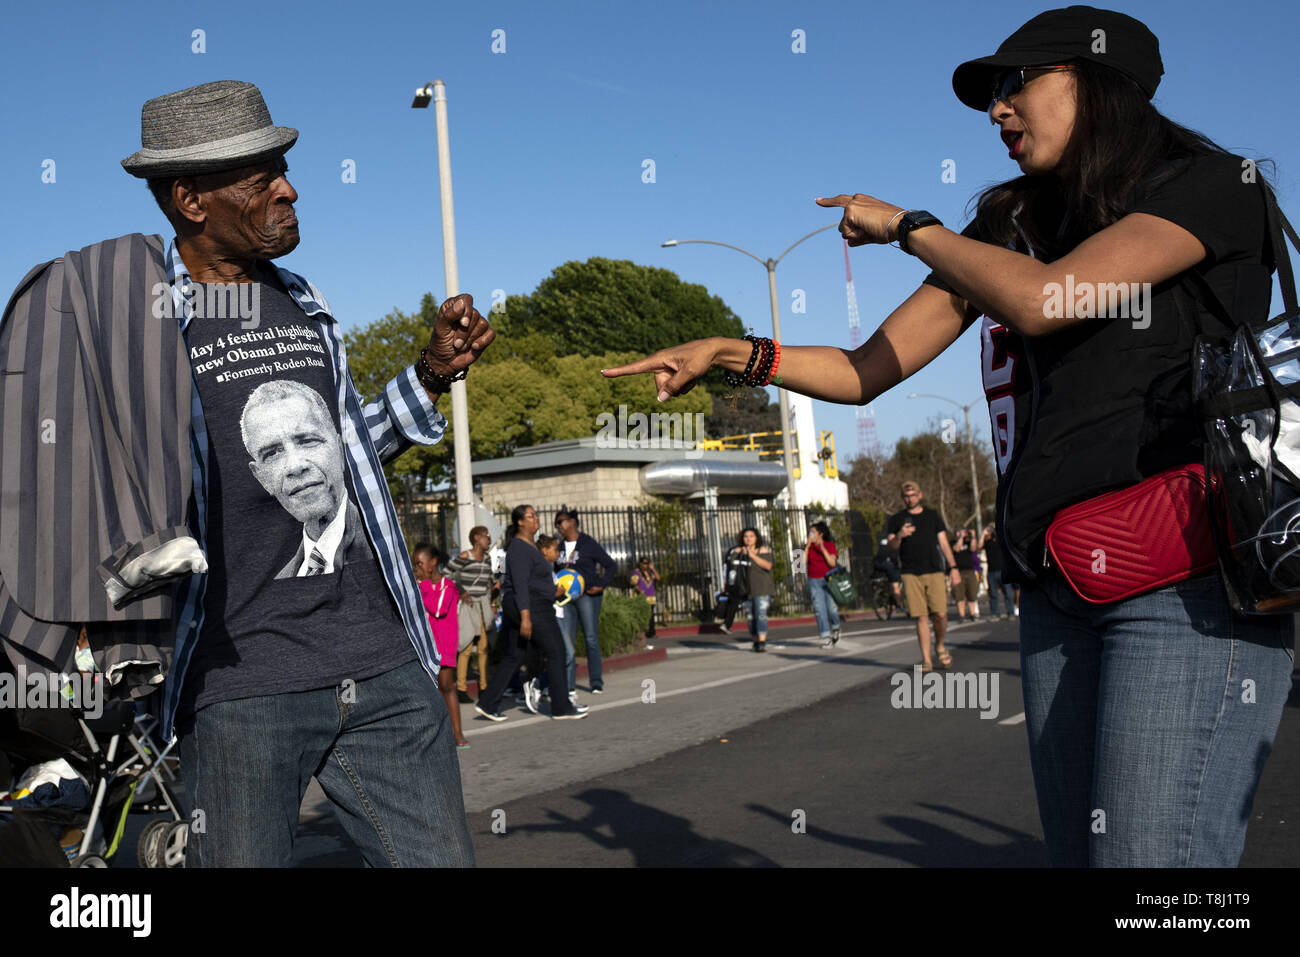 Los Angeles, CA, USA. 4th May, 2019. People seen having fun during the festival.People gather at a festival celebrating the renaming of Rodeo Road to Obama Boulevard, in honor of former US President Barack Obama in Los Angeles, California. Credit: Ronen Tivony/SOPA Images/ZUMA Wire/Alamy Live News Stock Photo